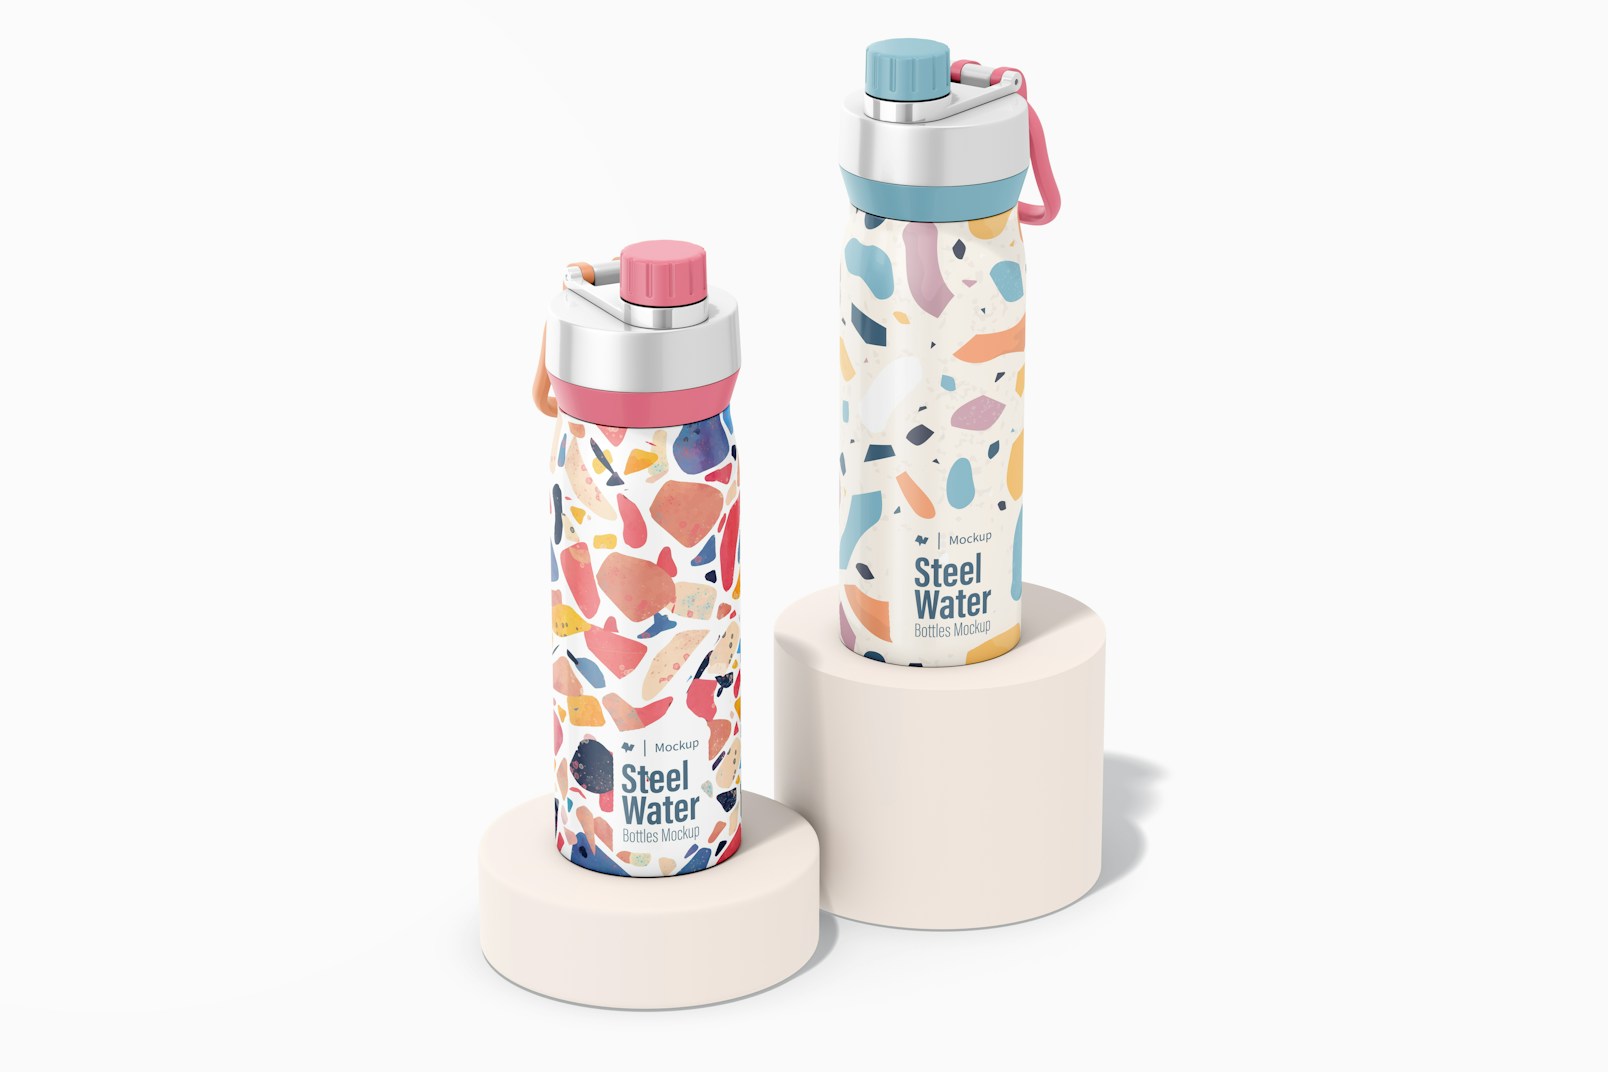 Large Water Bottles with Lid Mockup